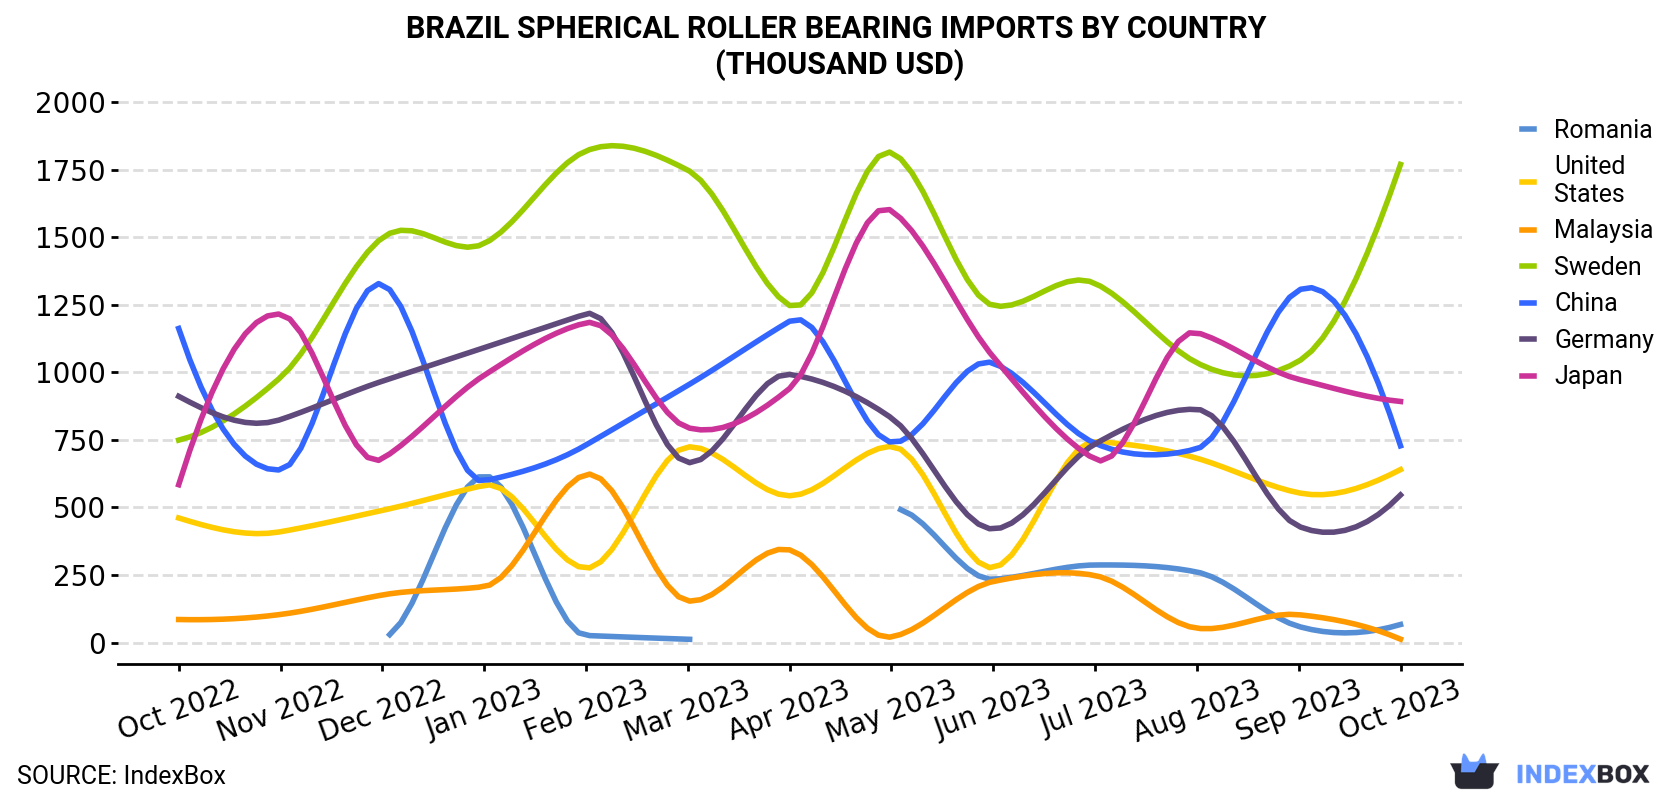 Brazil Spherical Roller Bearing Imports By Country (Thousand USD)